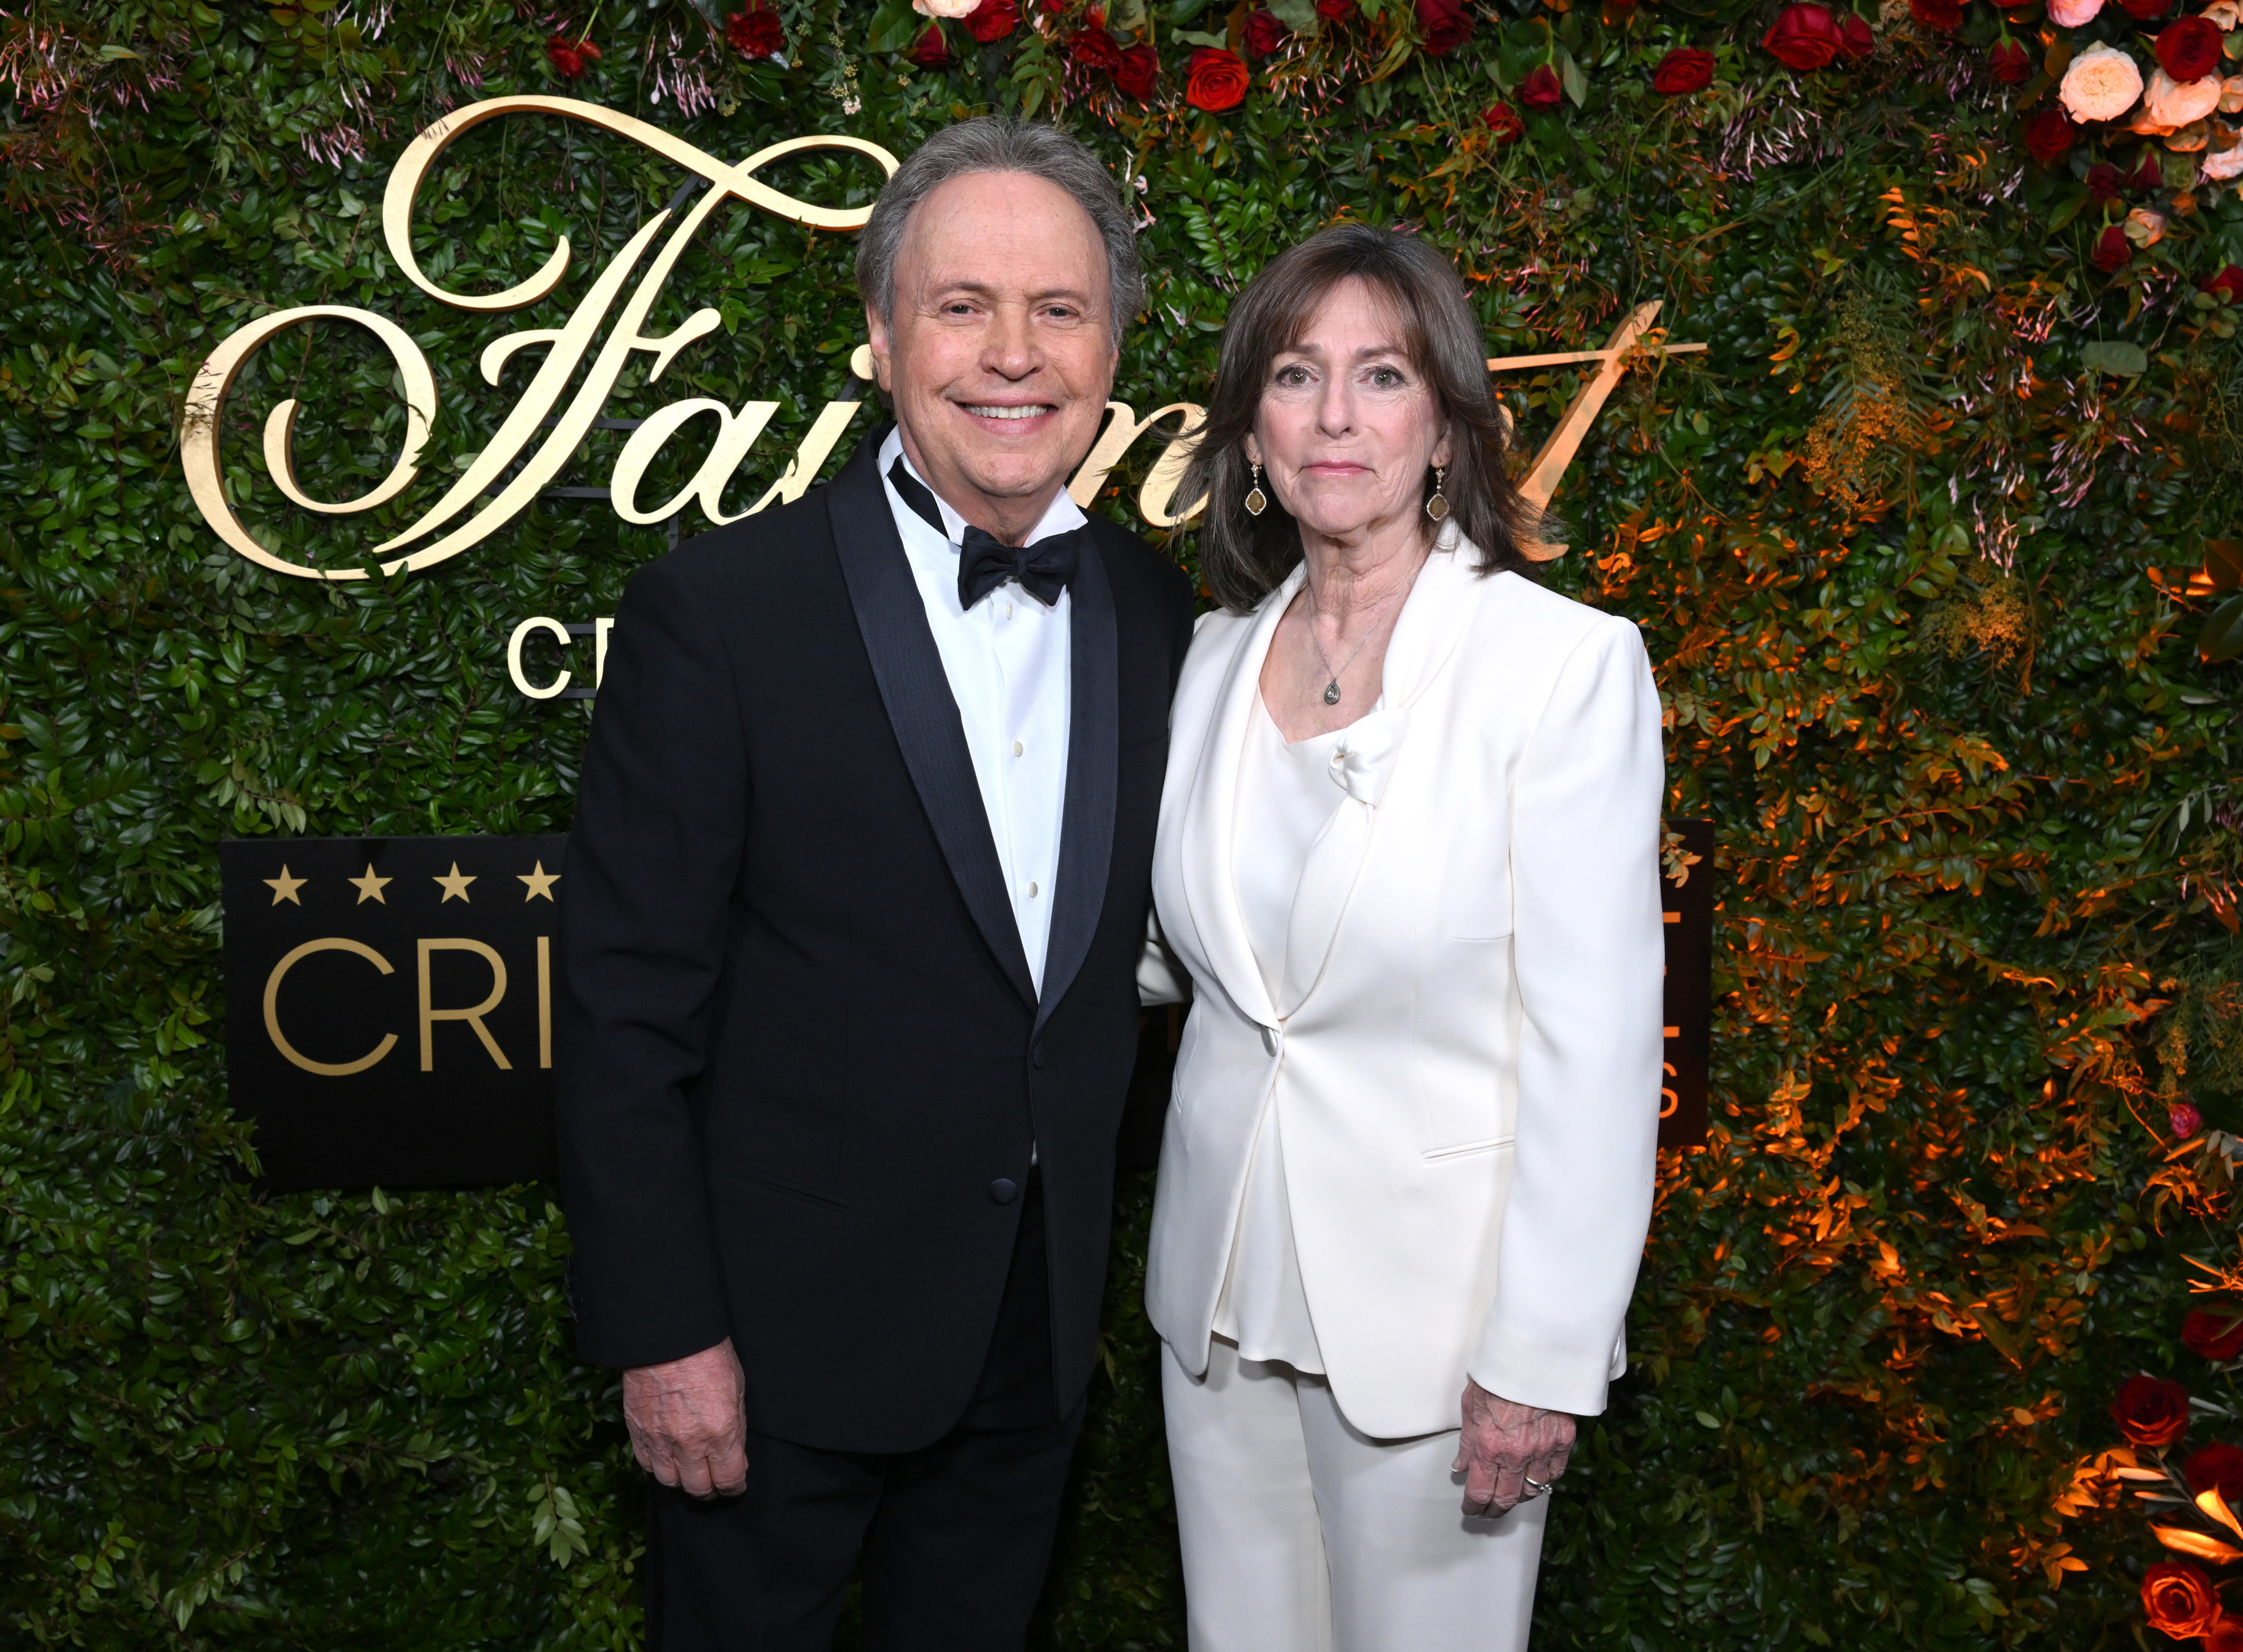 Billy and Janice Crystal attend the 27th Annual Critics Choice Awards at Fairmont Century Plaza in March 2022